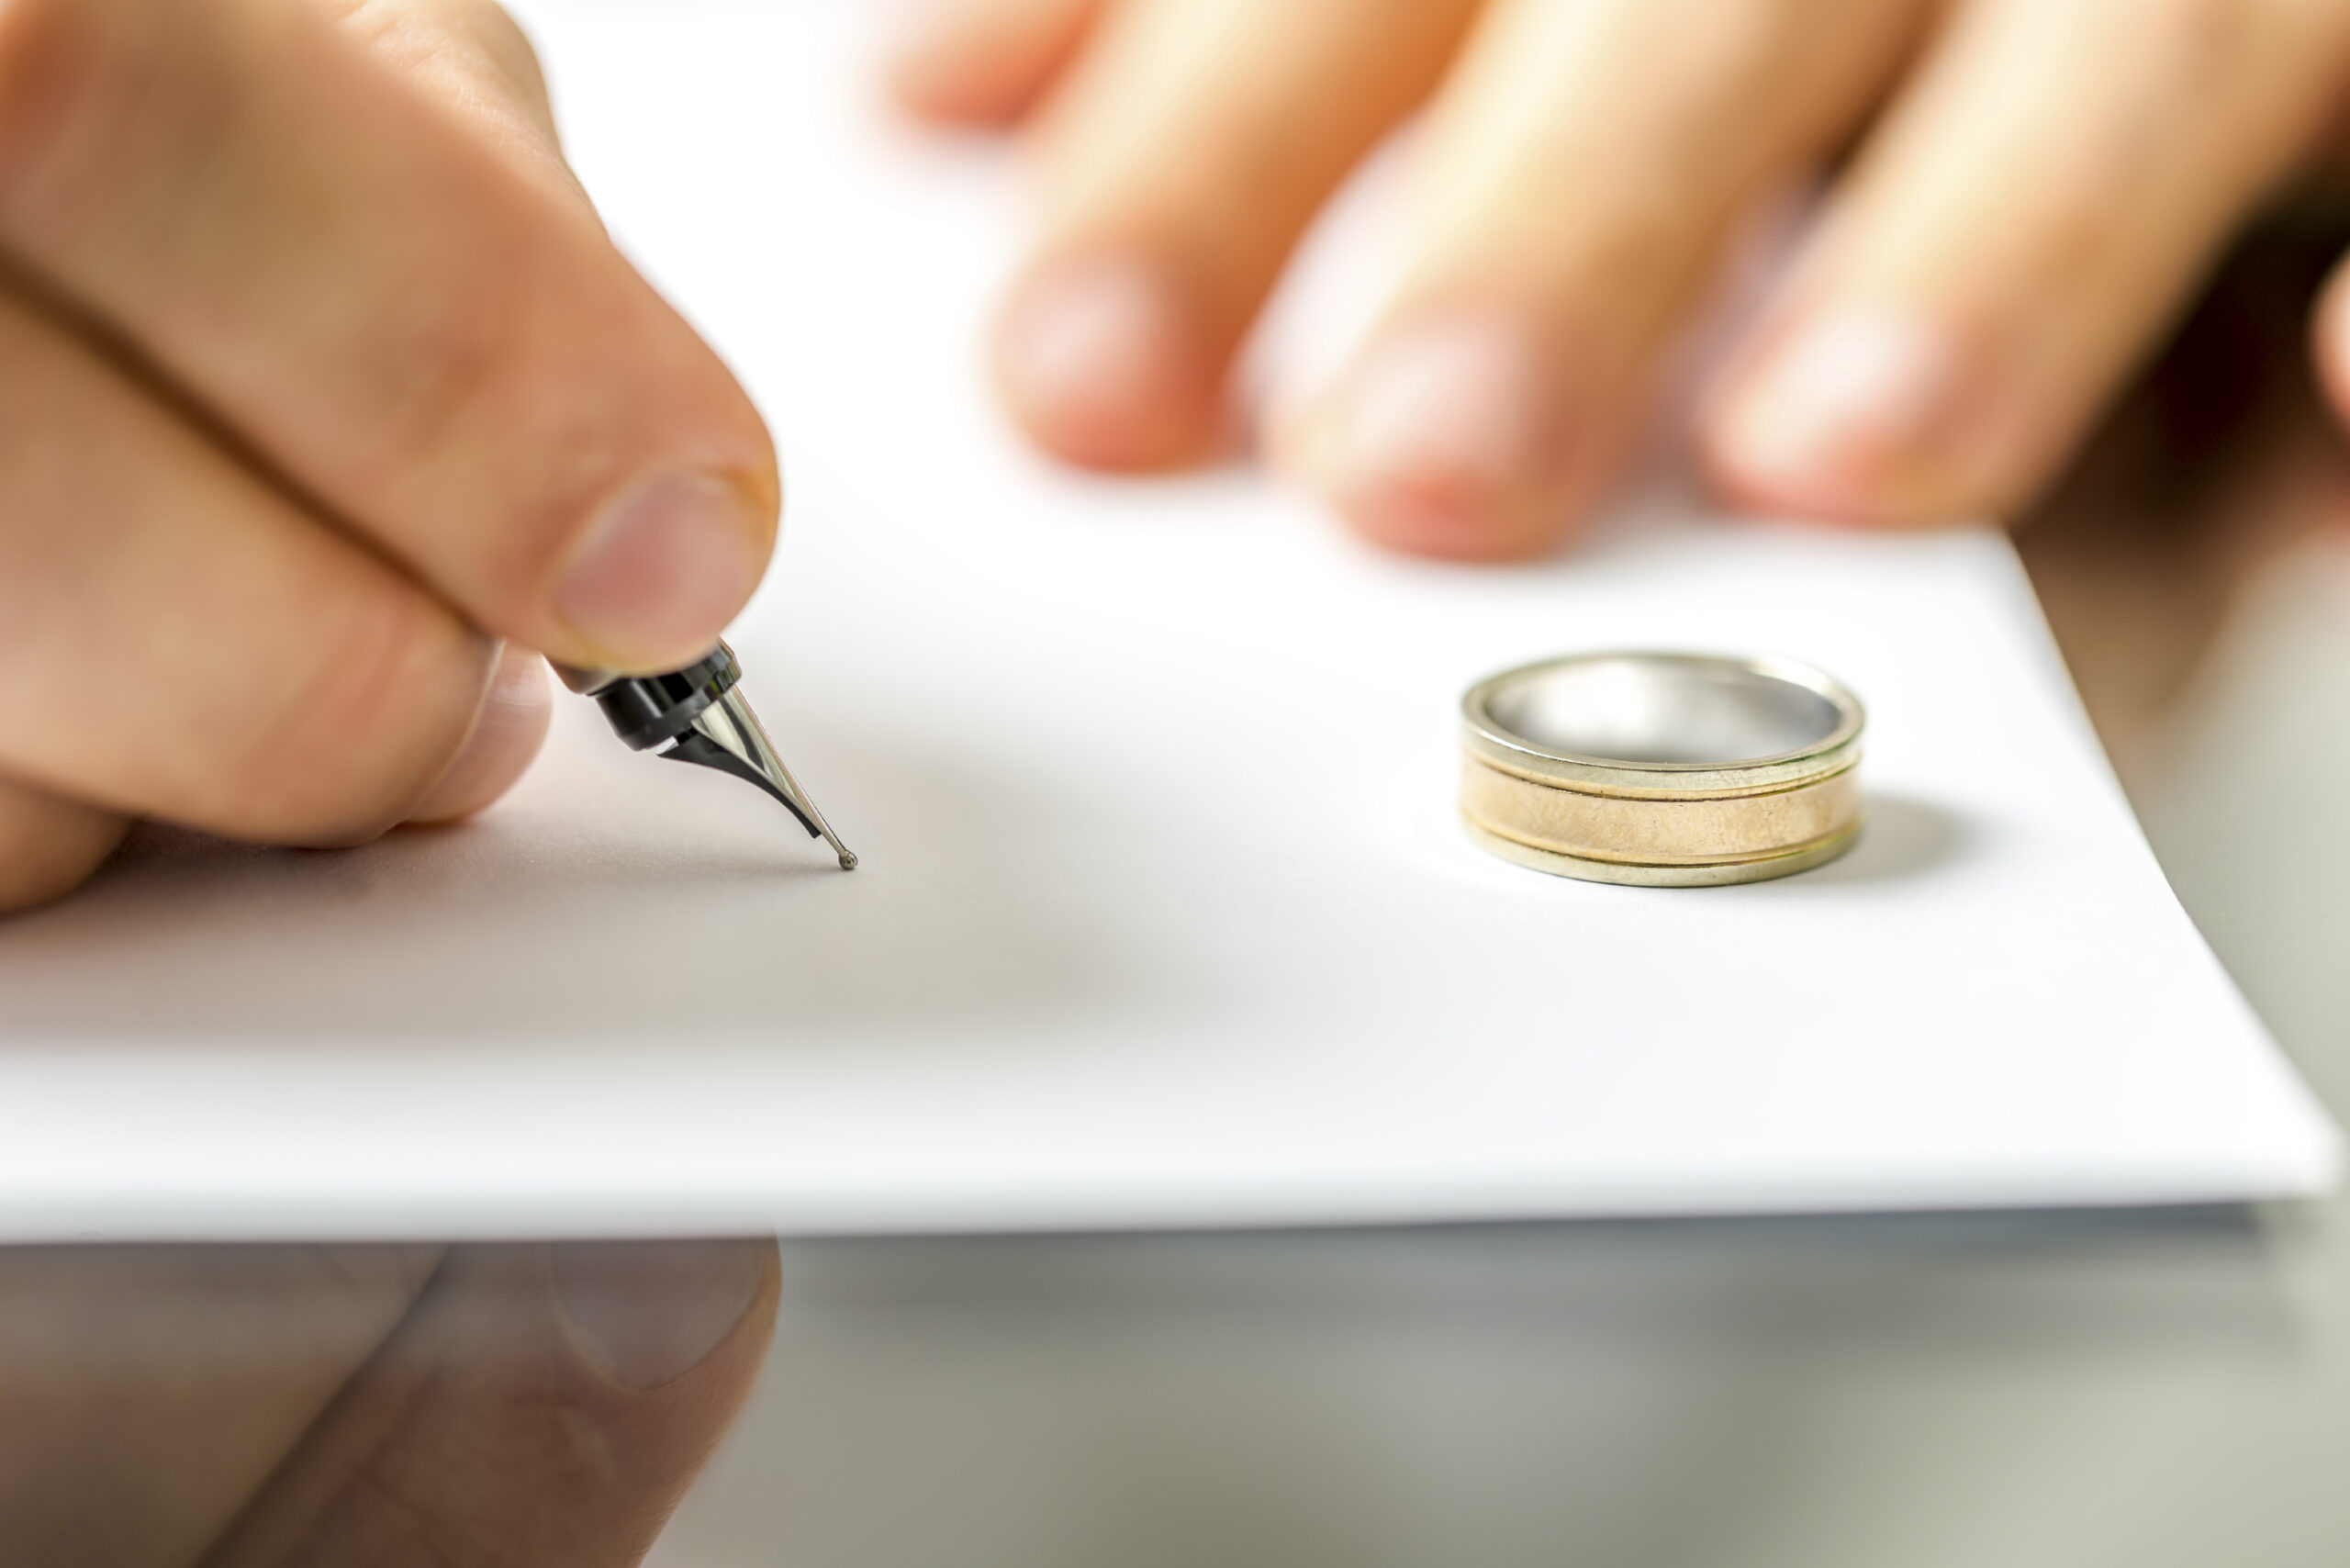 Questions Concerning Moving Out During Your Legal Separation